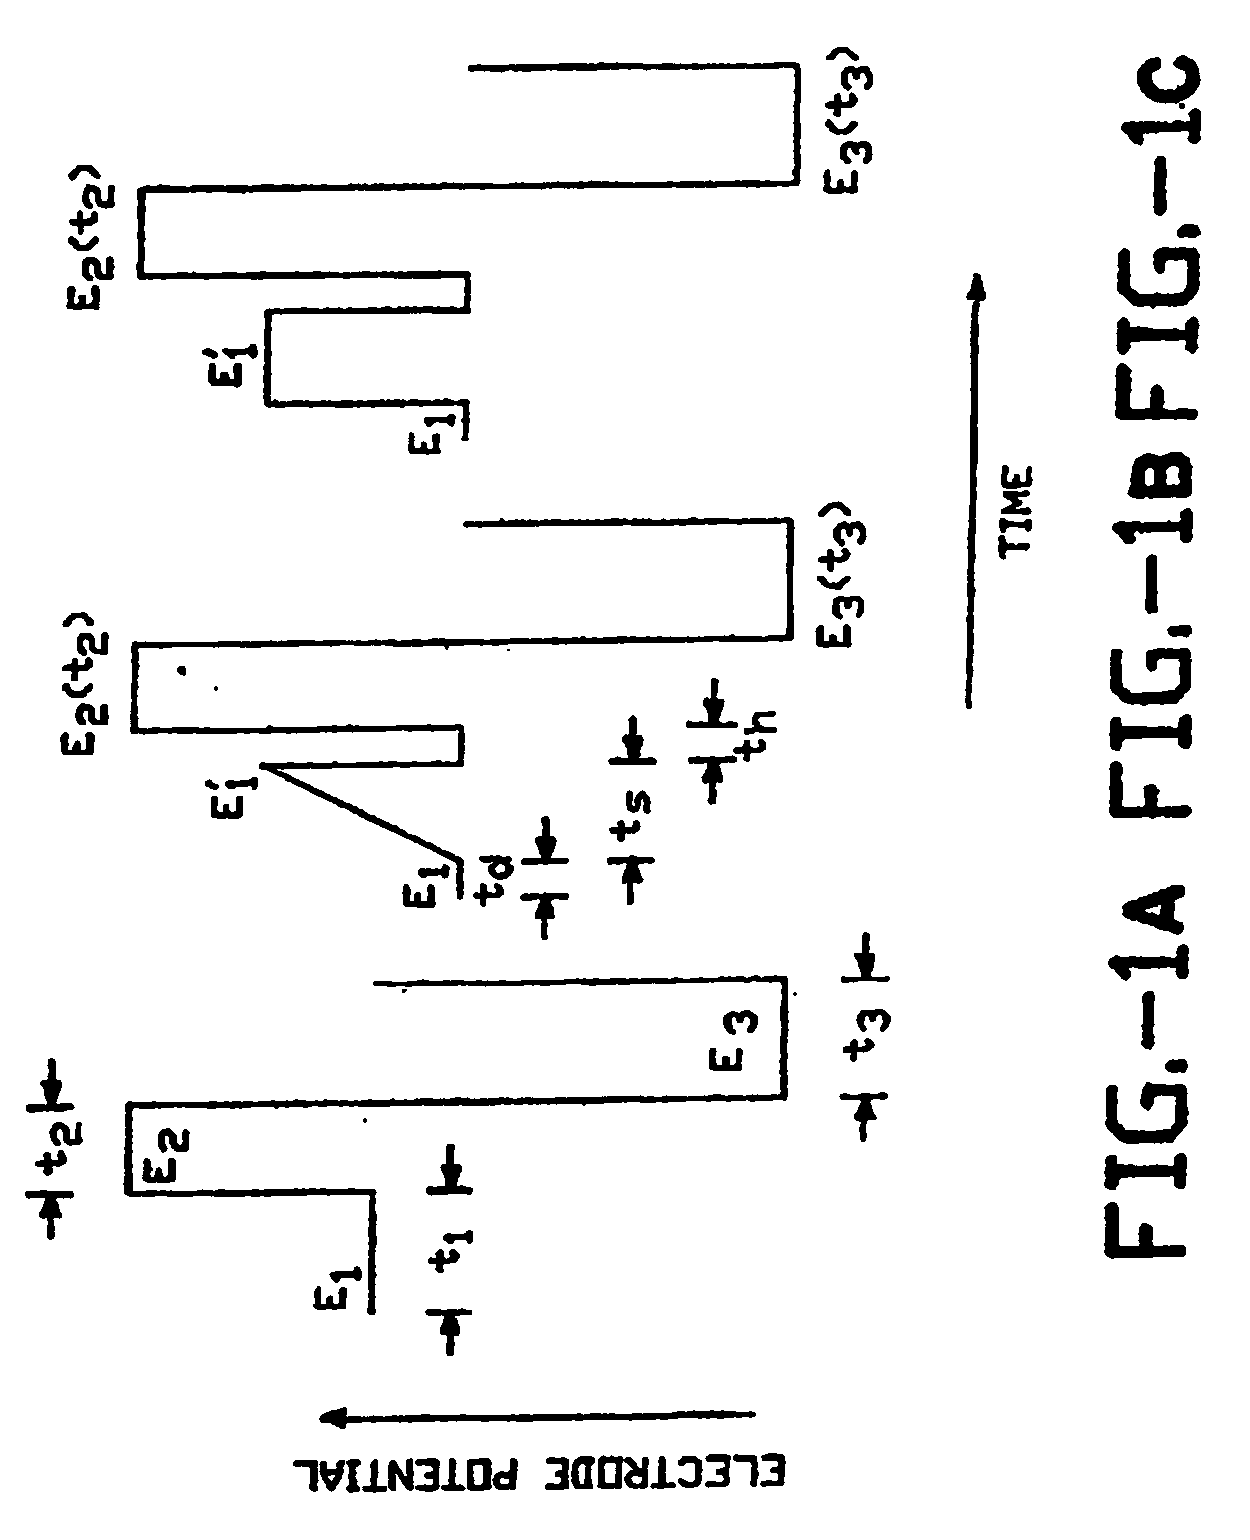 Pulsed electrochemical detection method